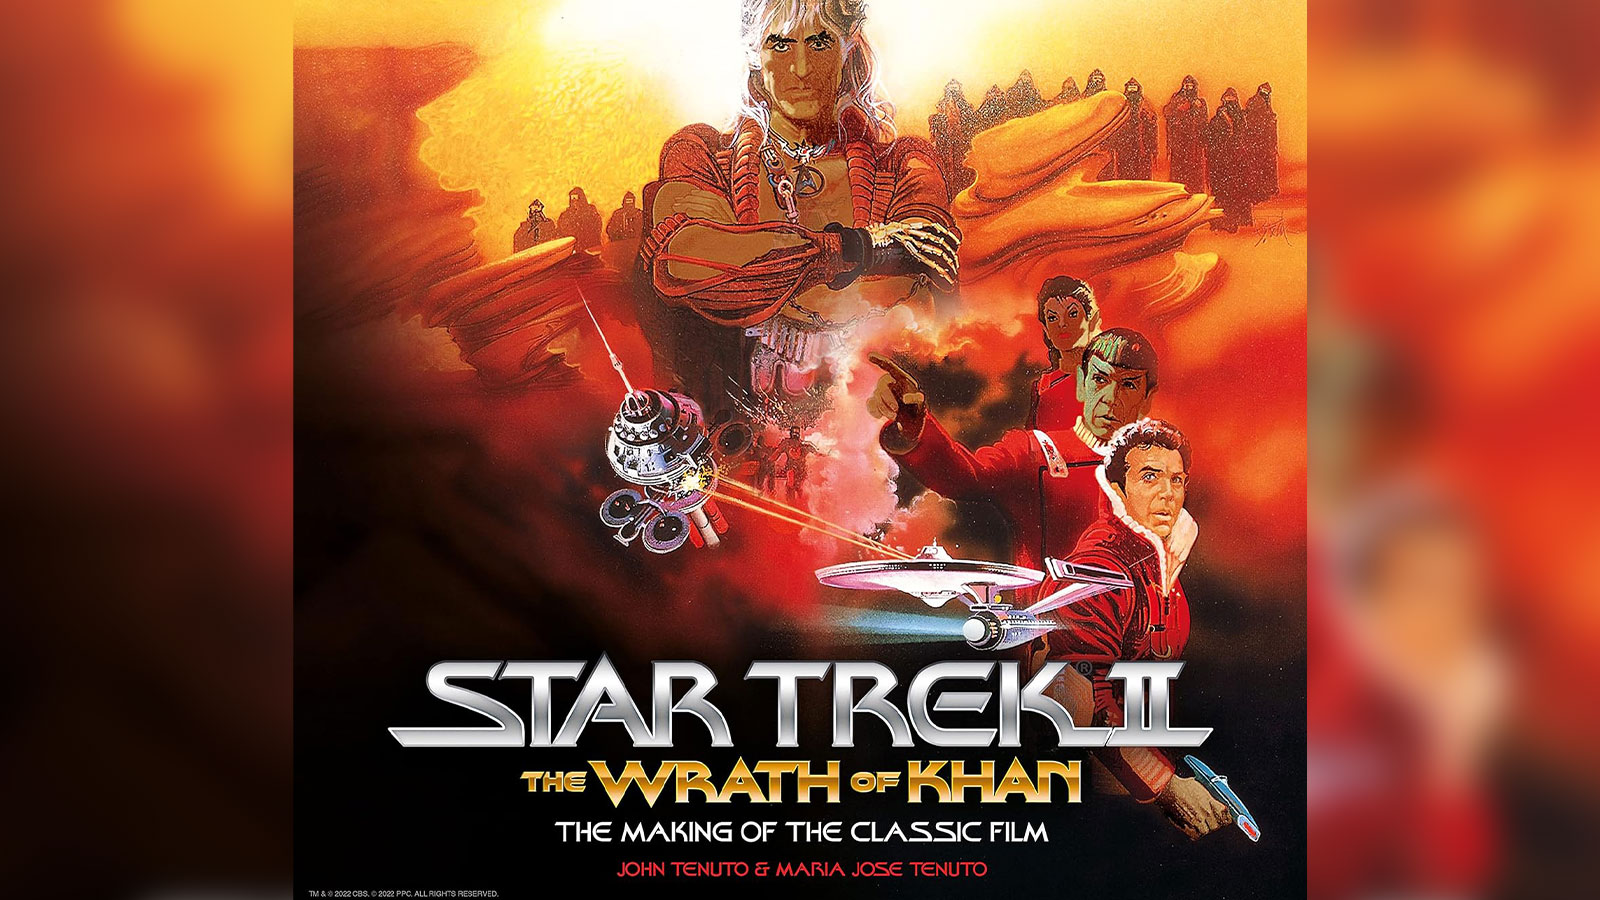 The Wrath of Khan: The Making of the Classic Film Review: A gem for your Star Trek reference collection